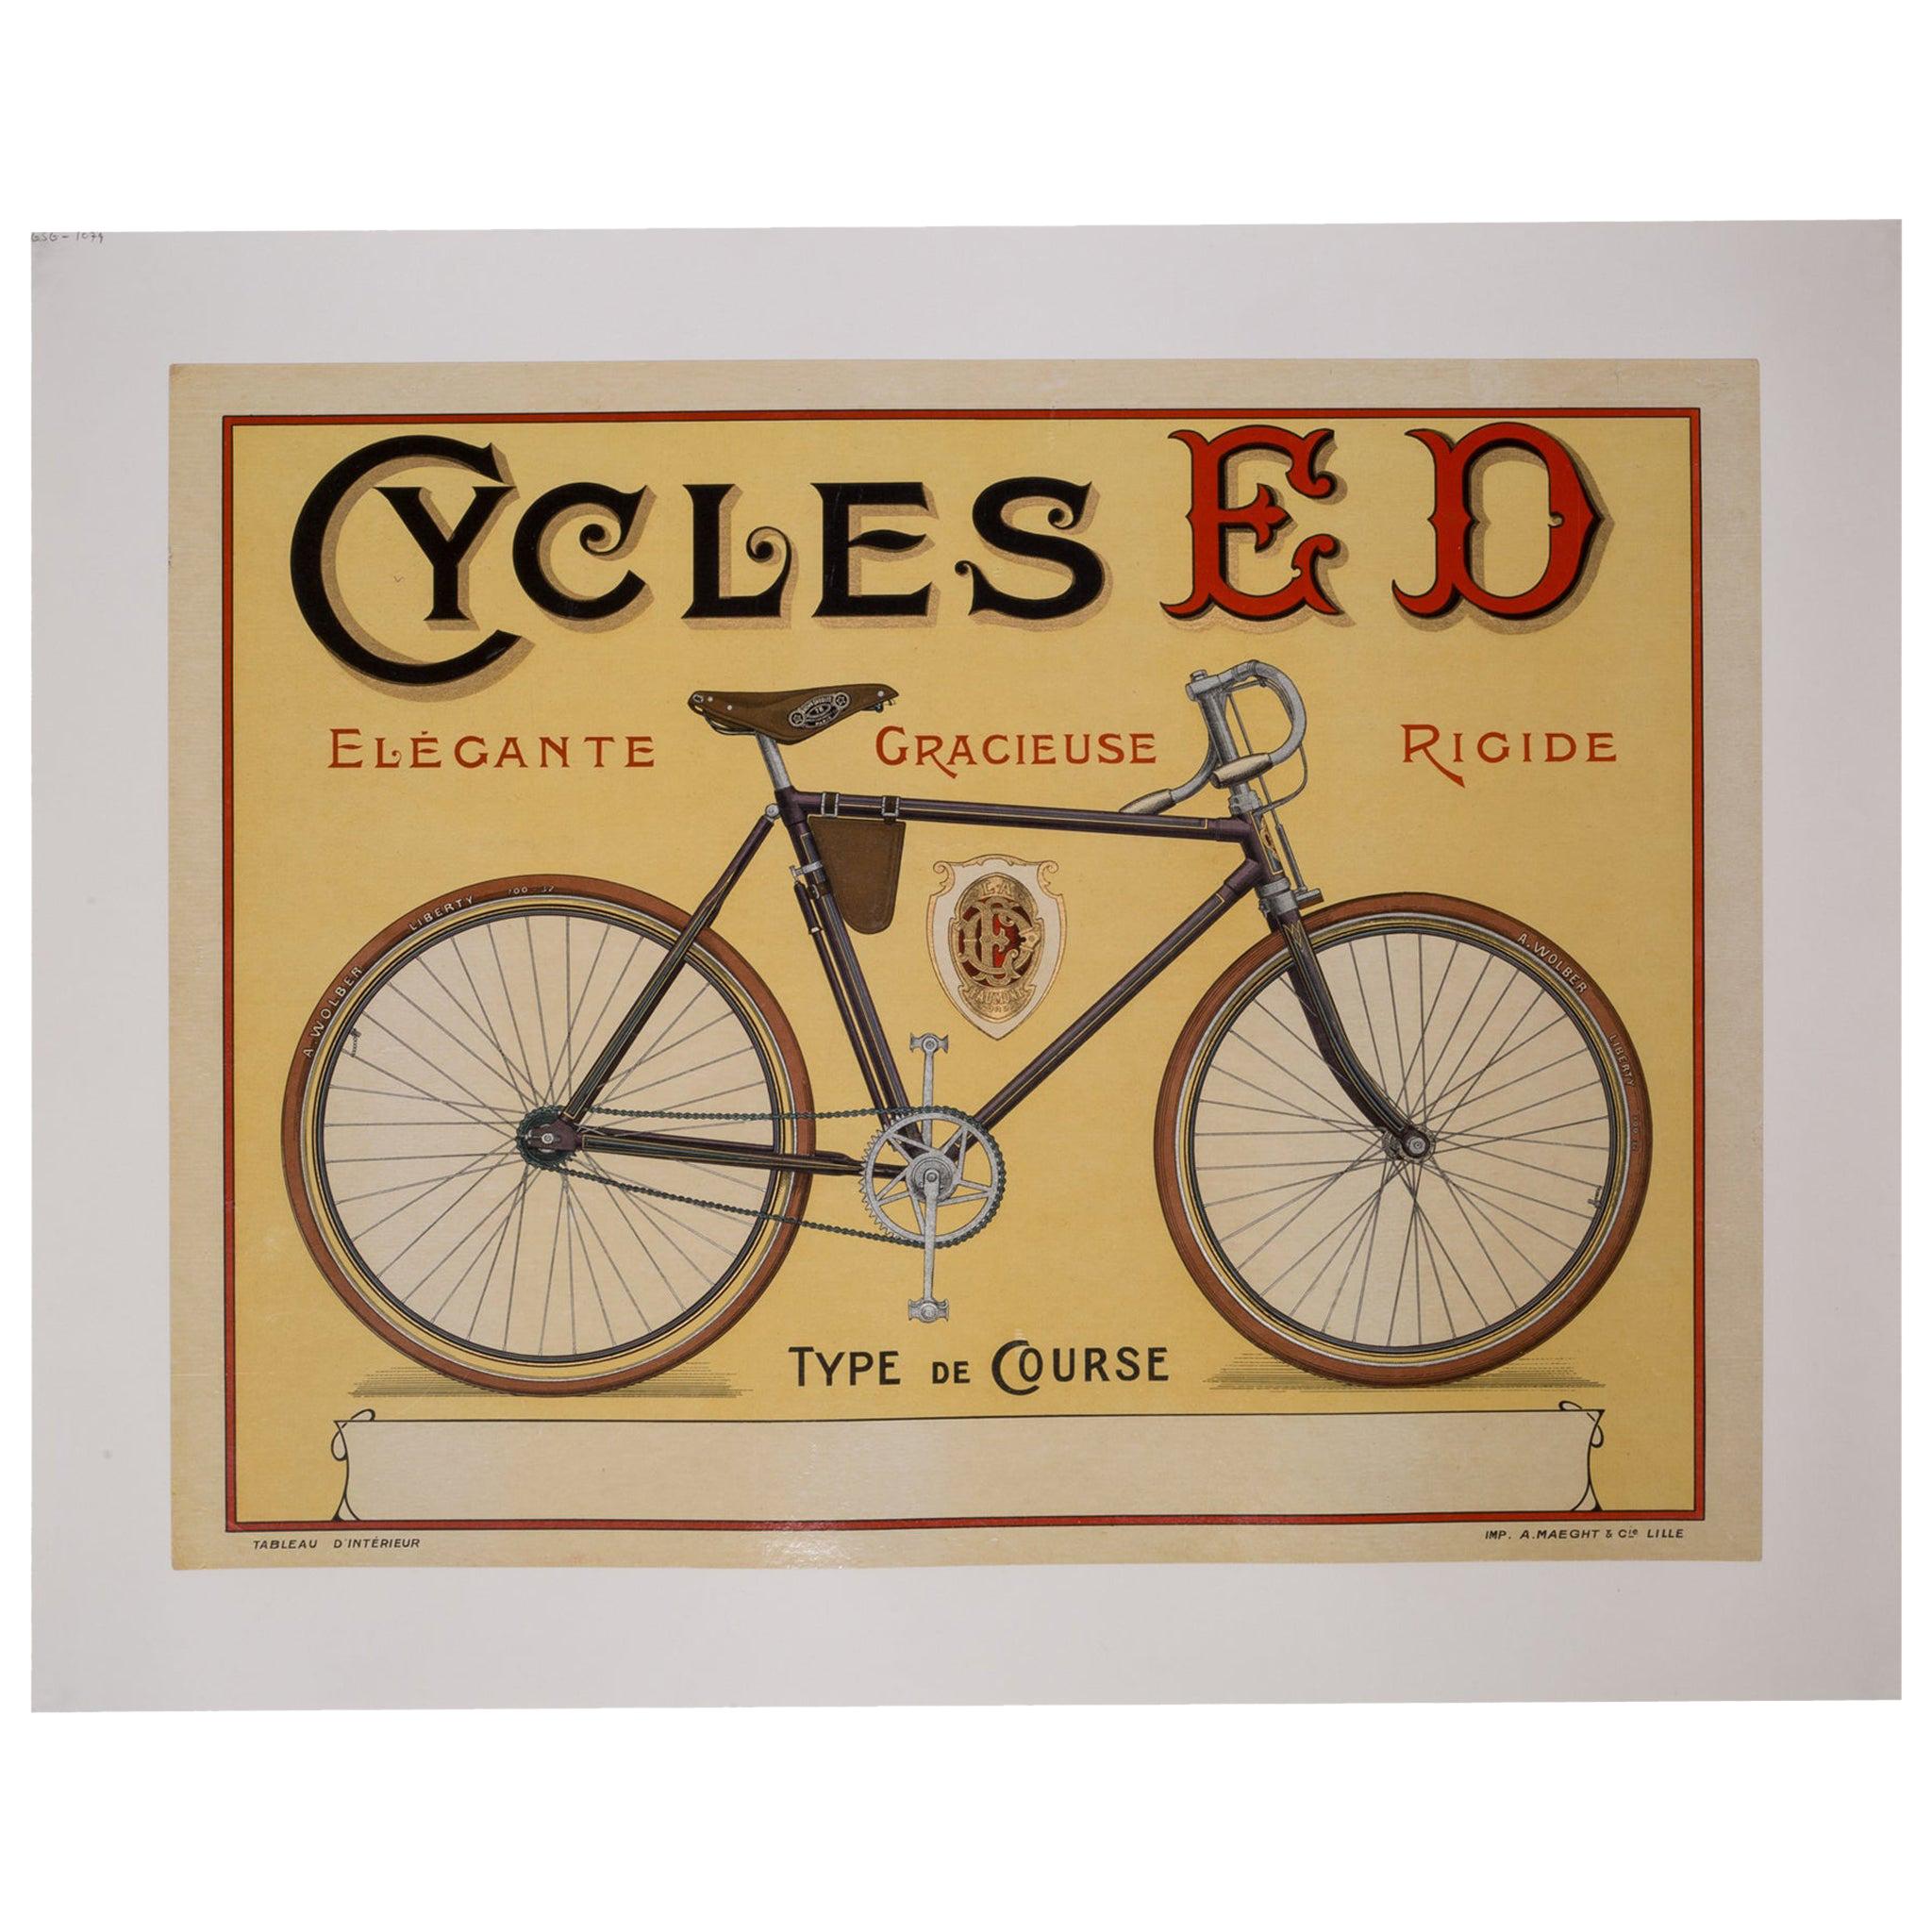 Vintage French Advertising Poster "Cycles ED", circa 1910